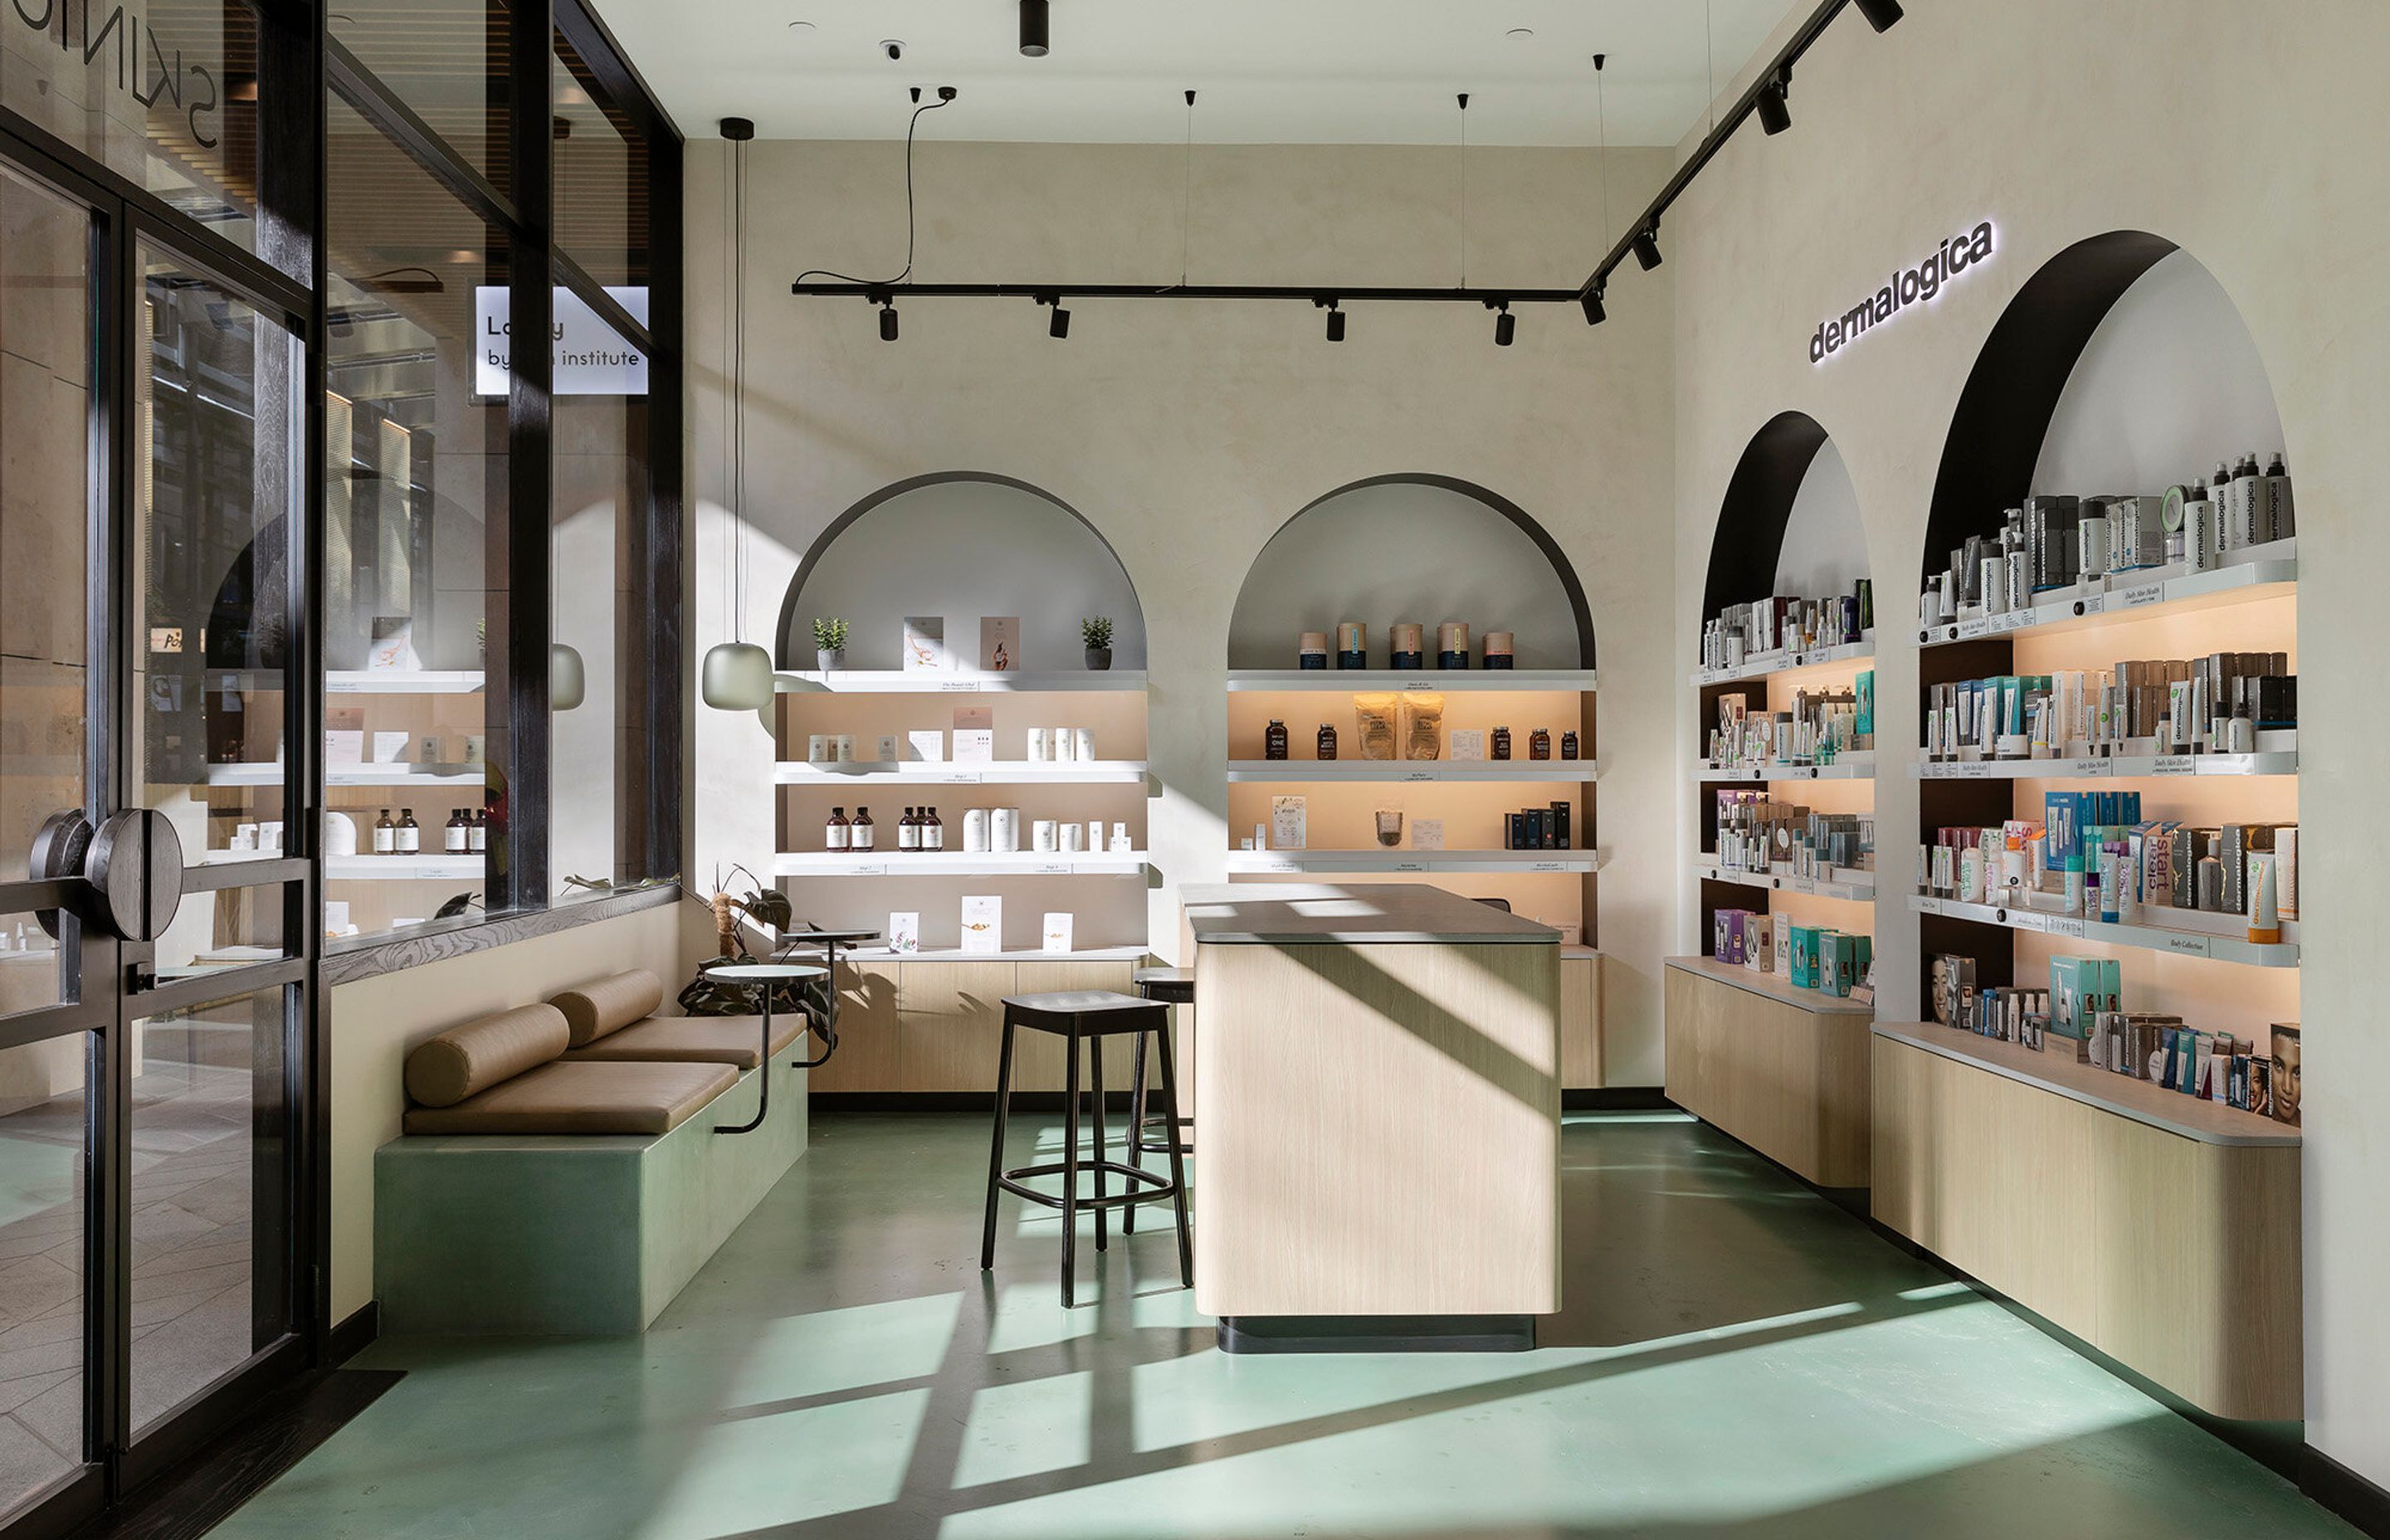 Skintopia Commercial Bay – Design principles for the space is creating a calm and serene space using natural, glowing, and translucent materials. Products are displayed in a beautiful yet unobtrusive way that’s complimented by the warm and soft lighting.